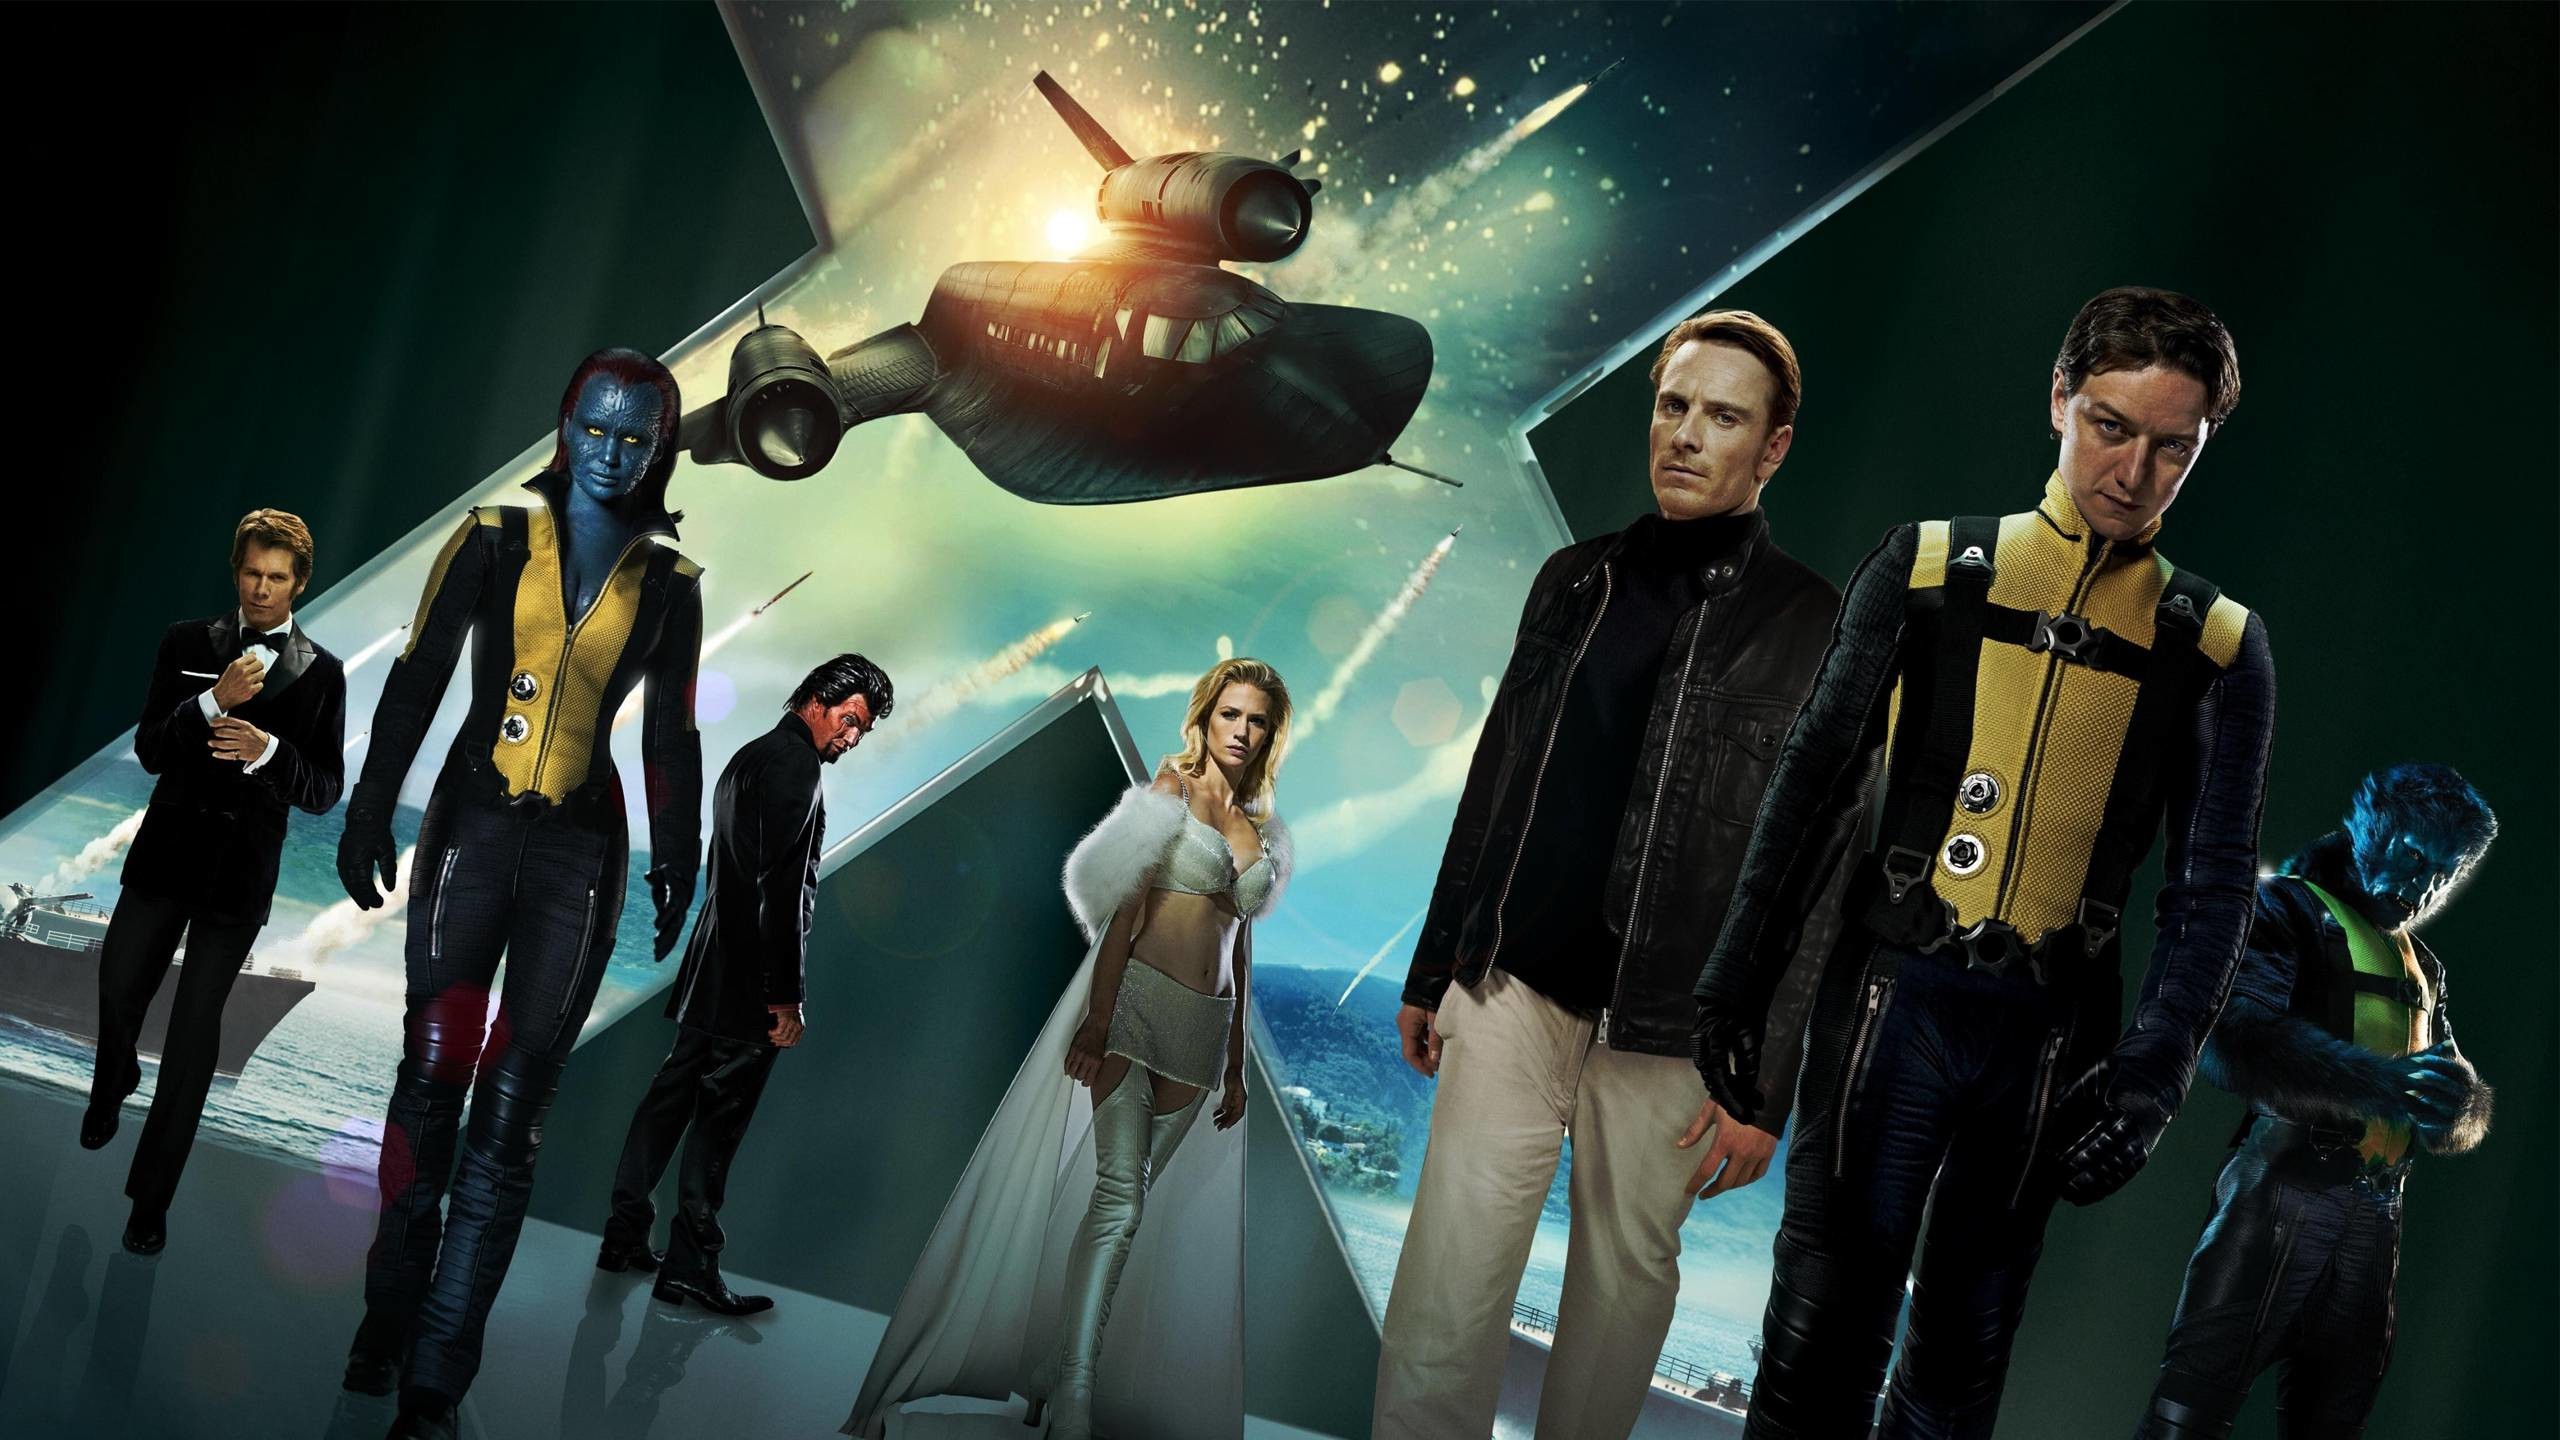 2560x1440 X Men, Movies, Mystique, Beast (character), Magneto, Charles Xavier,  Michael Fassbender, James McAvoy, Emma Frost, X Men: First Class Wallpapers  HD ...